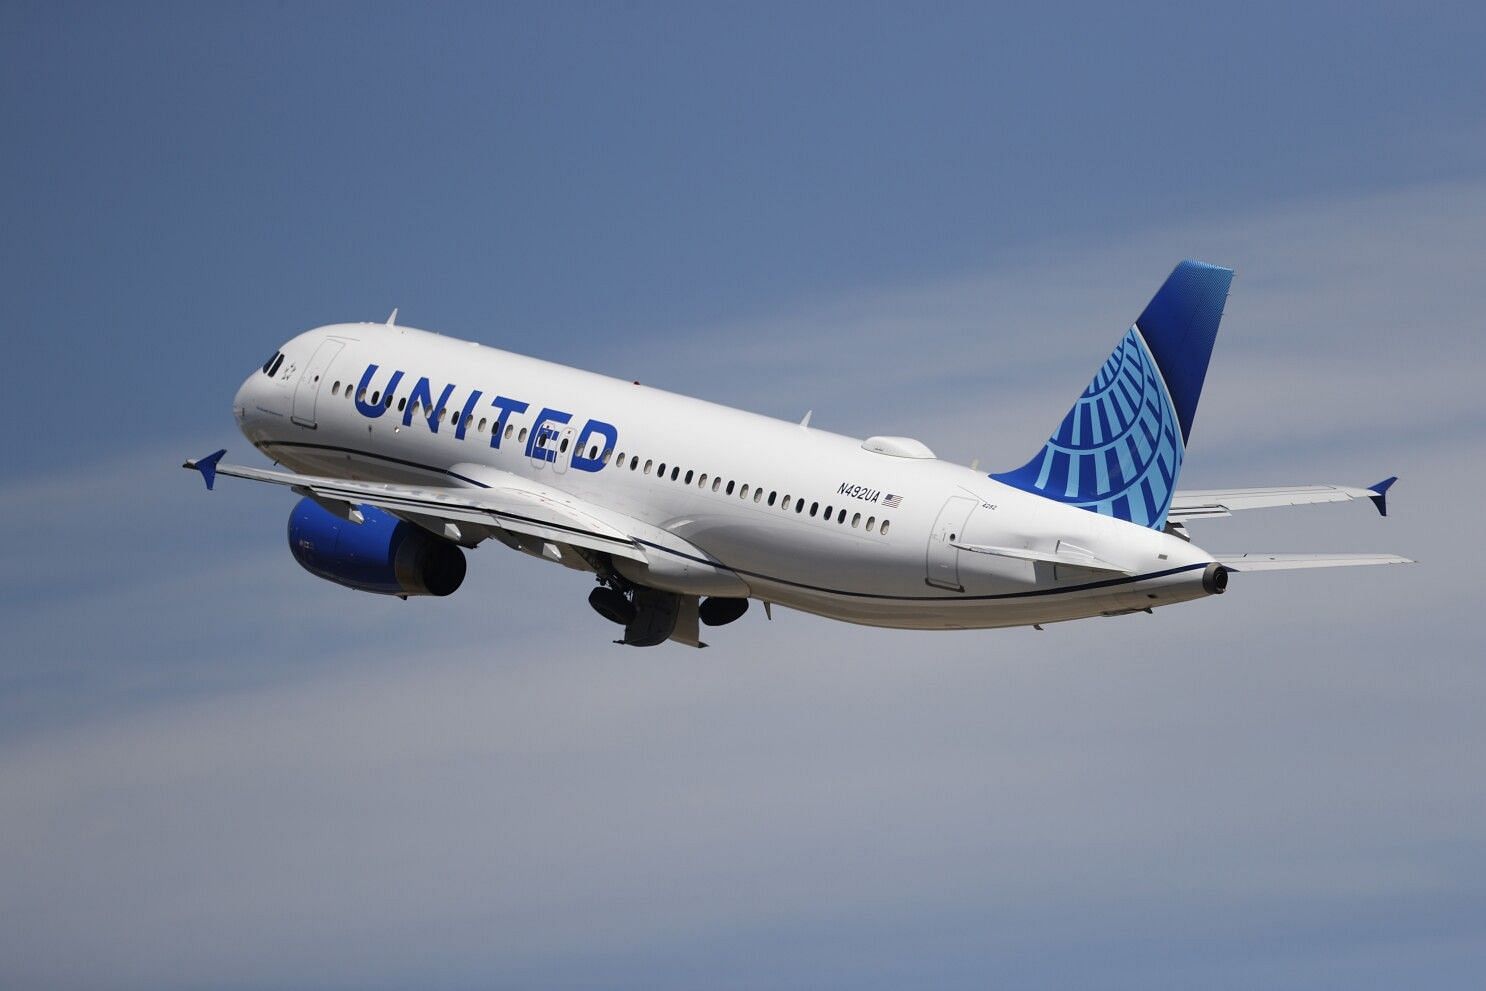 Social media users bashed the Airlines staff as the employee yelled at a Muslim passenger for being late. (Image via United Airlines)